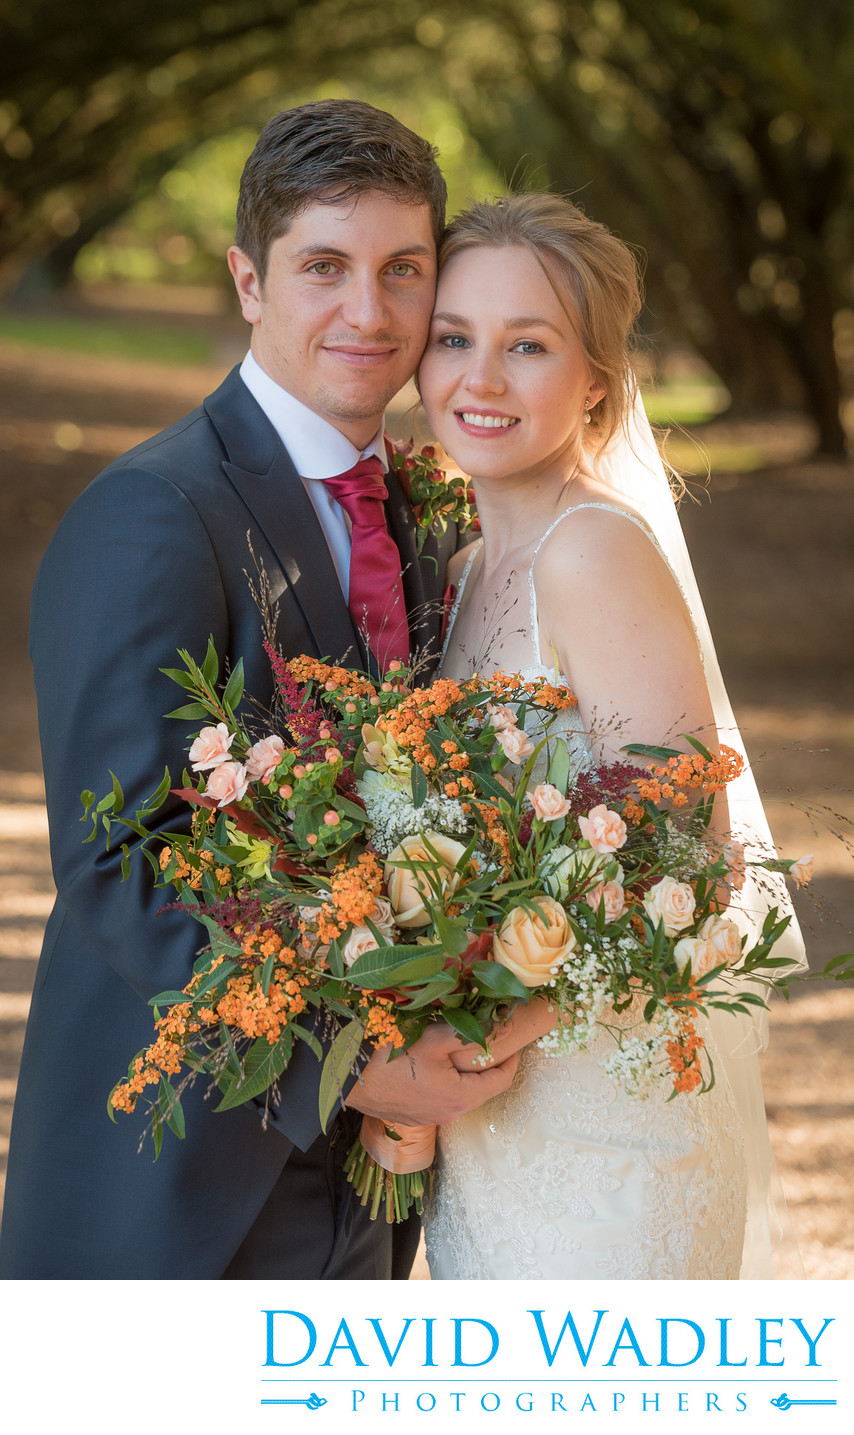 Wedding Photography at New Hall Hotel Sutton Coldfield.